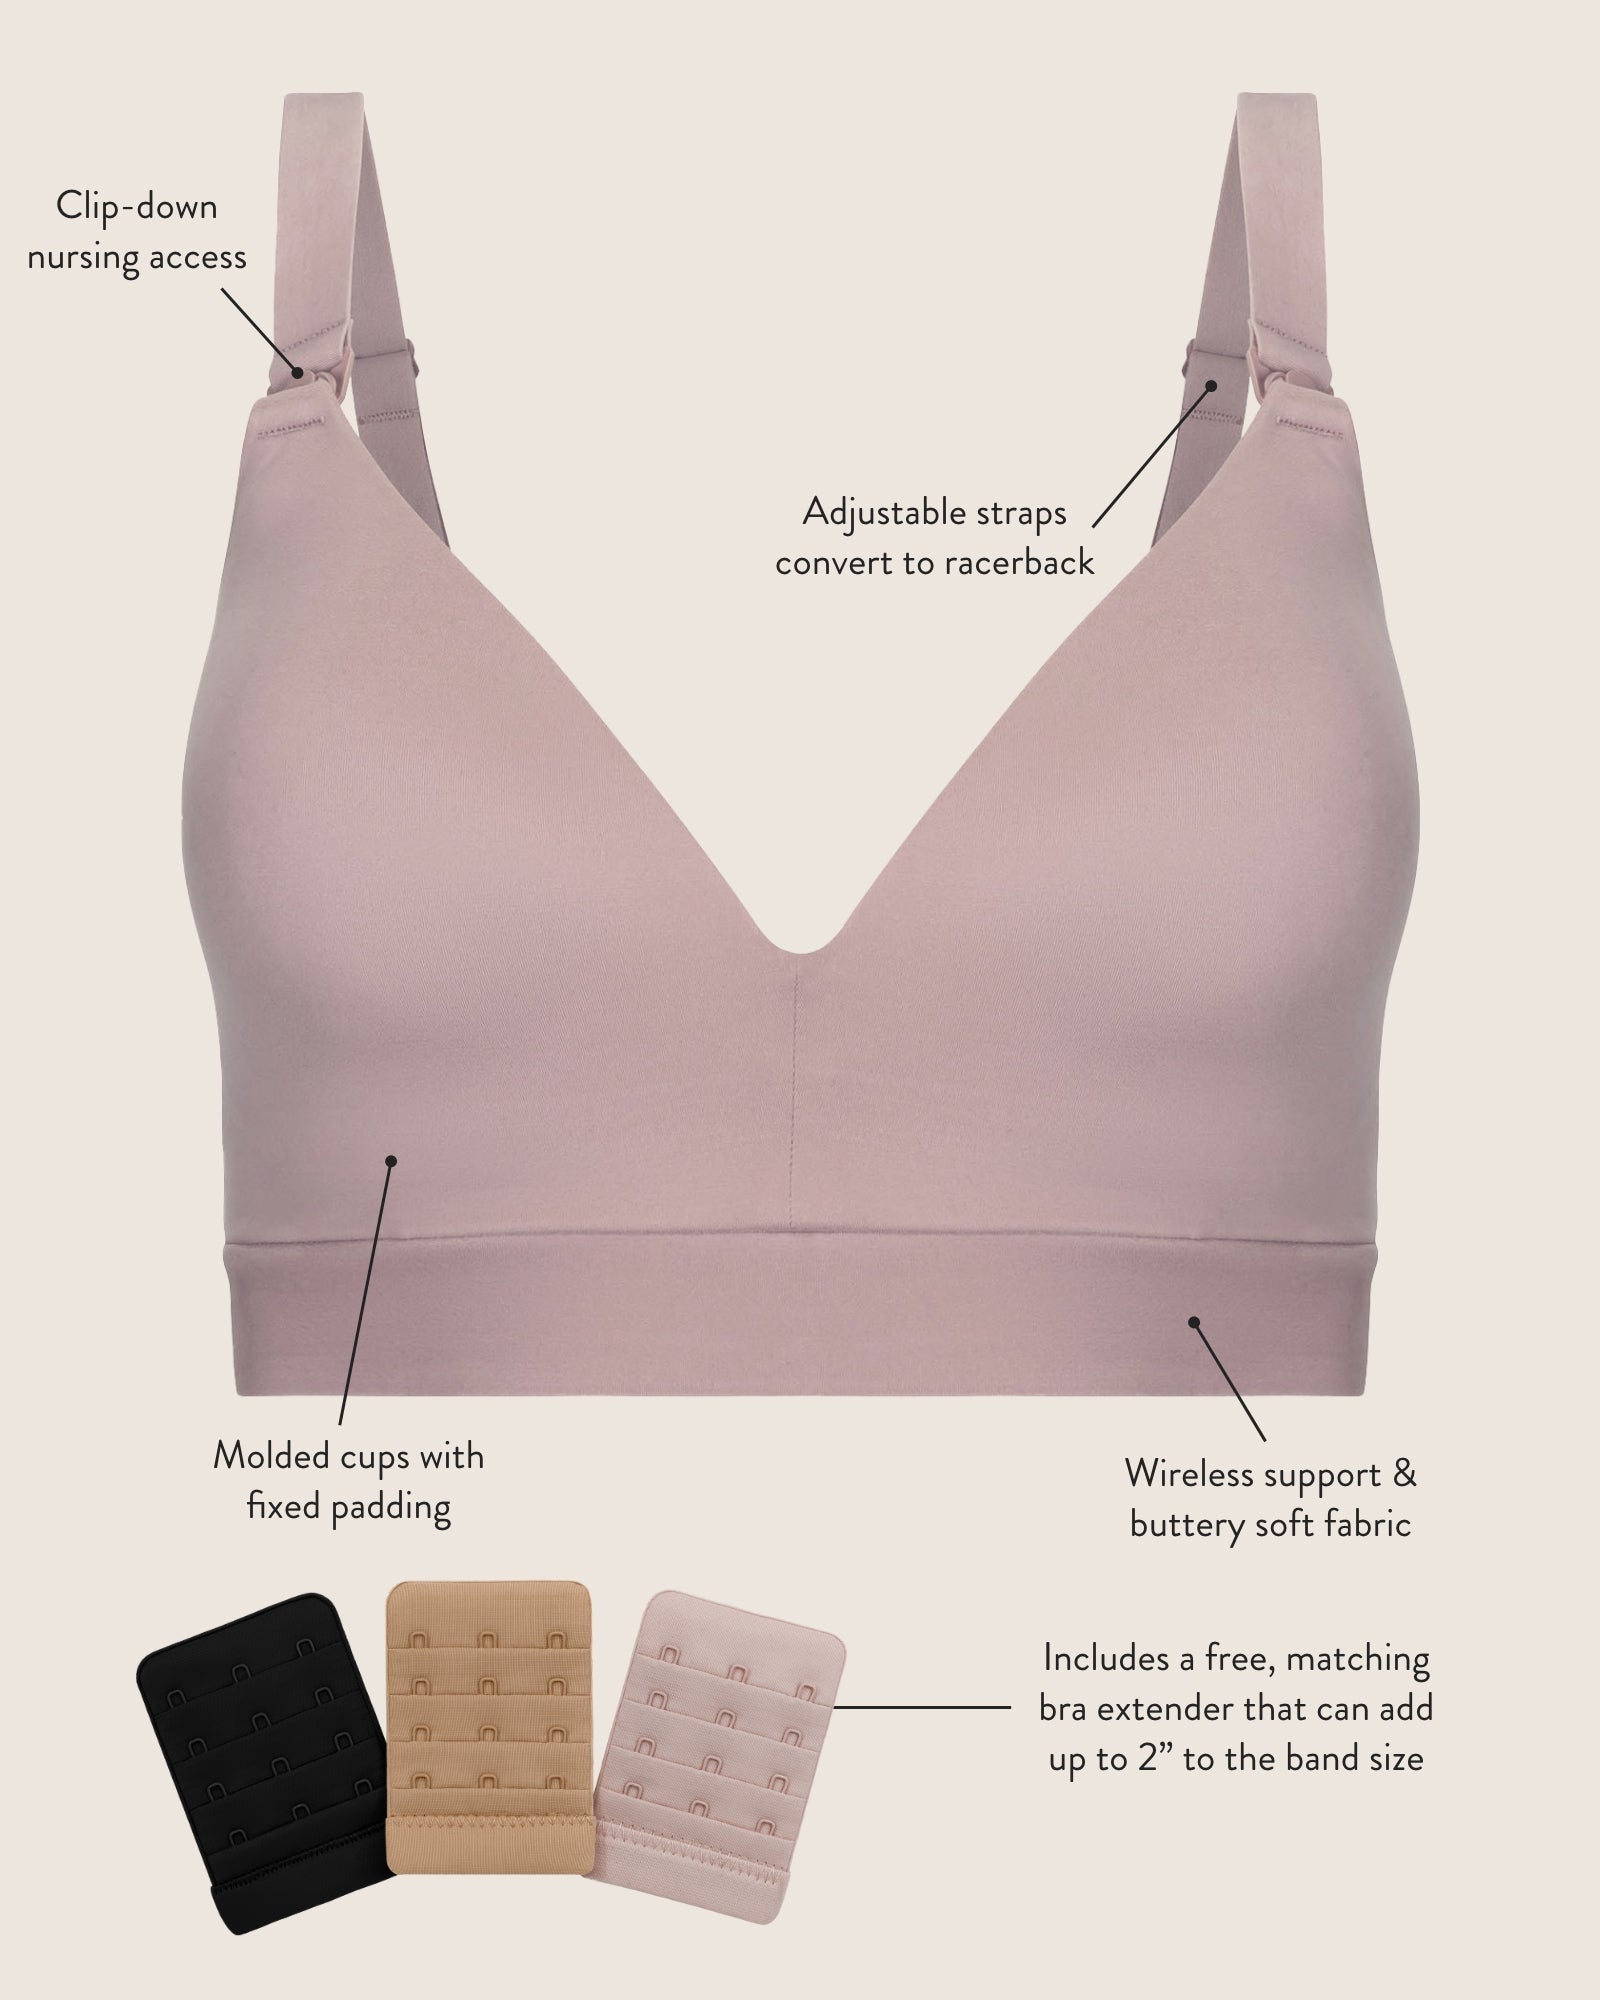 Flat image of the Minimalist Maternity & Nursing Bra showcasing all the unique qualities: Clip-down nursing access, adjustable straps that convert to racerback and wireless cups. 